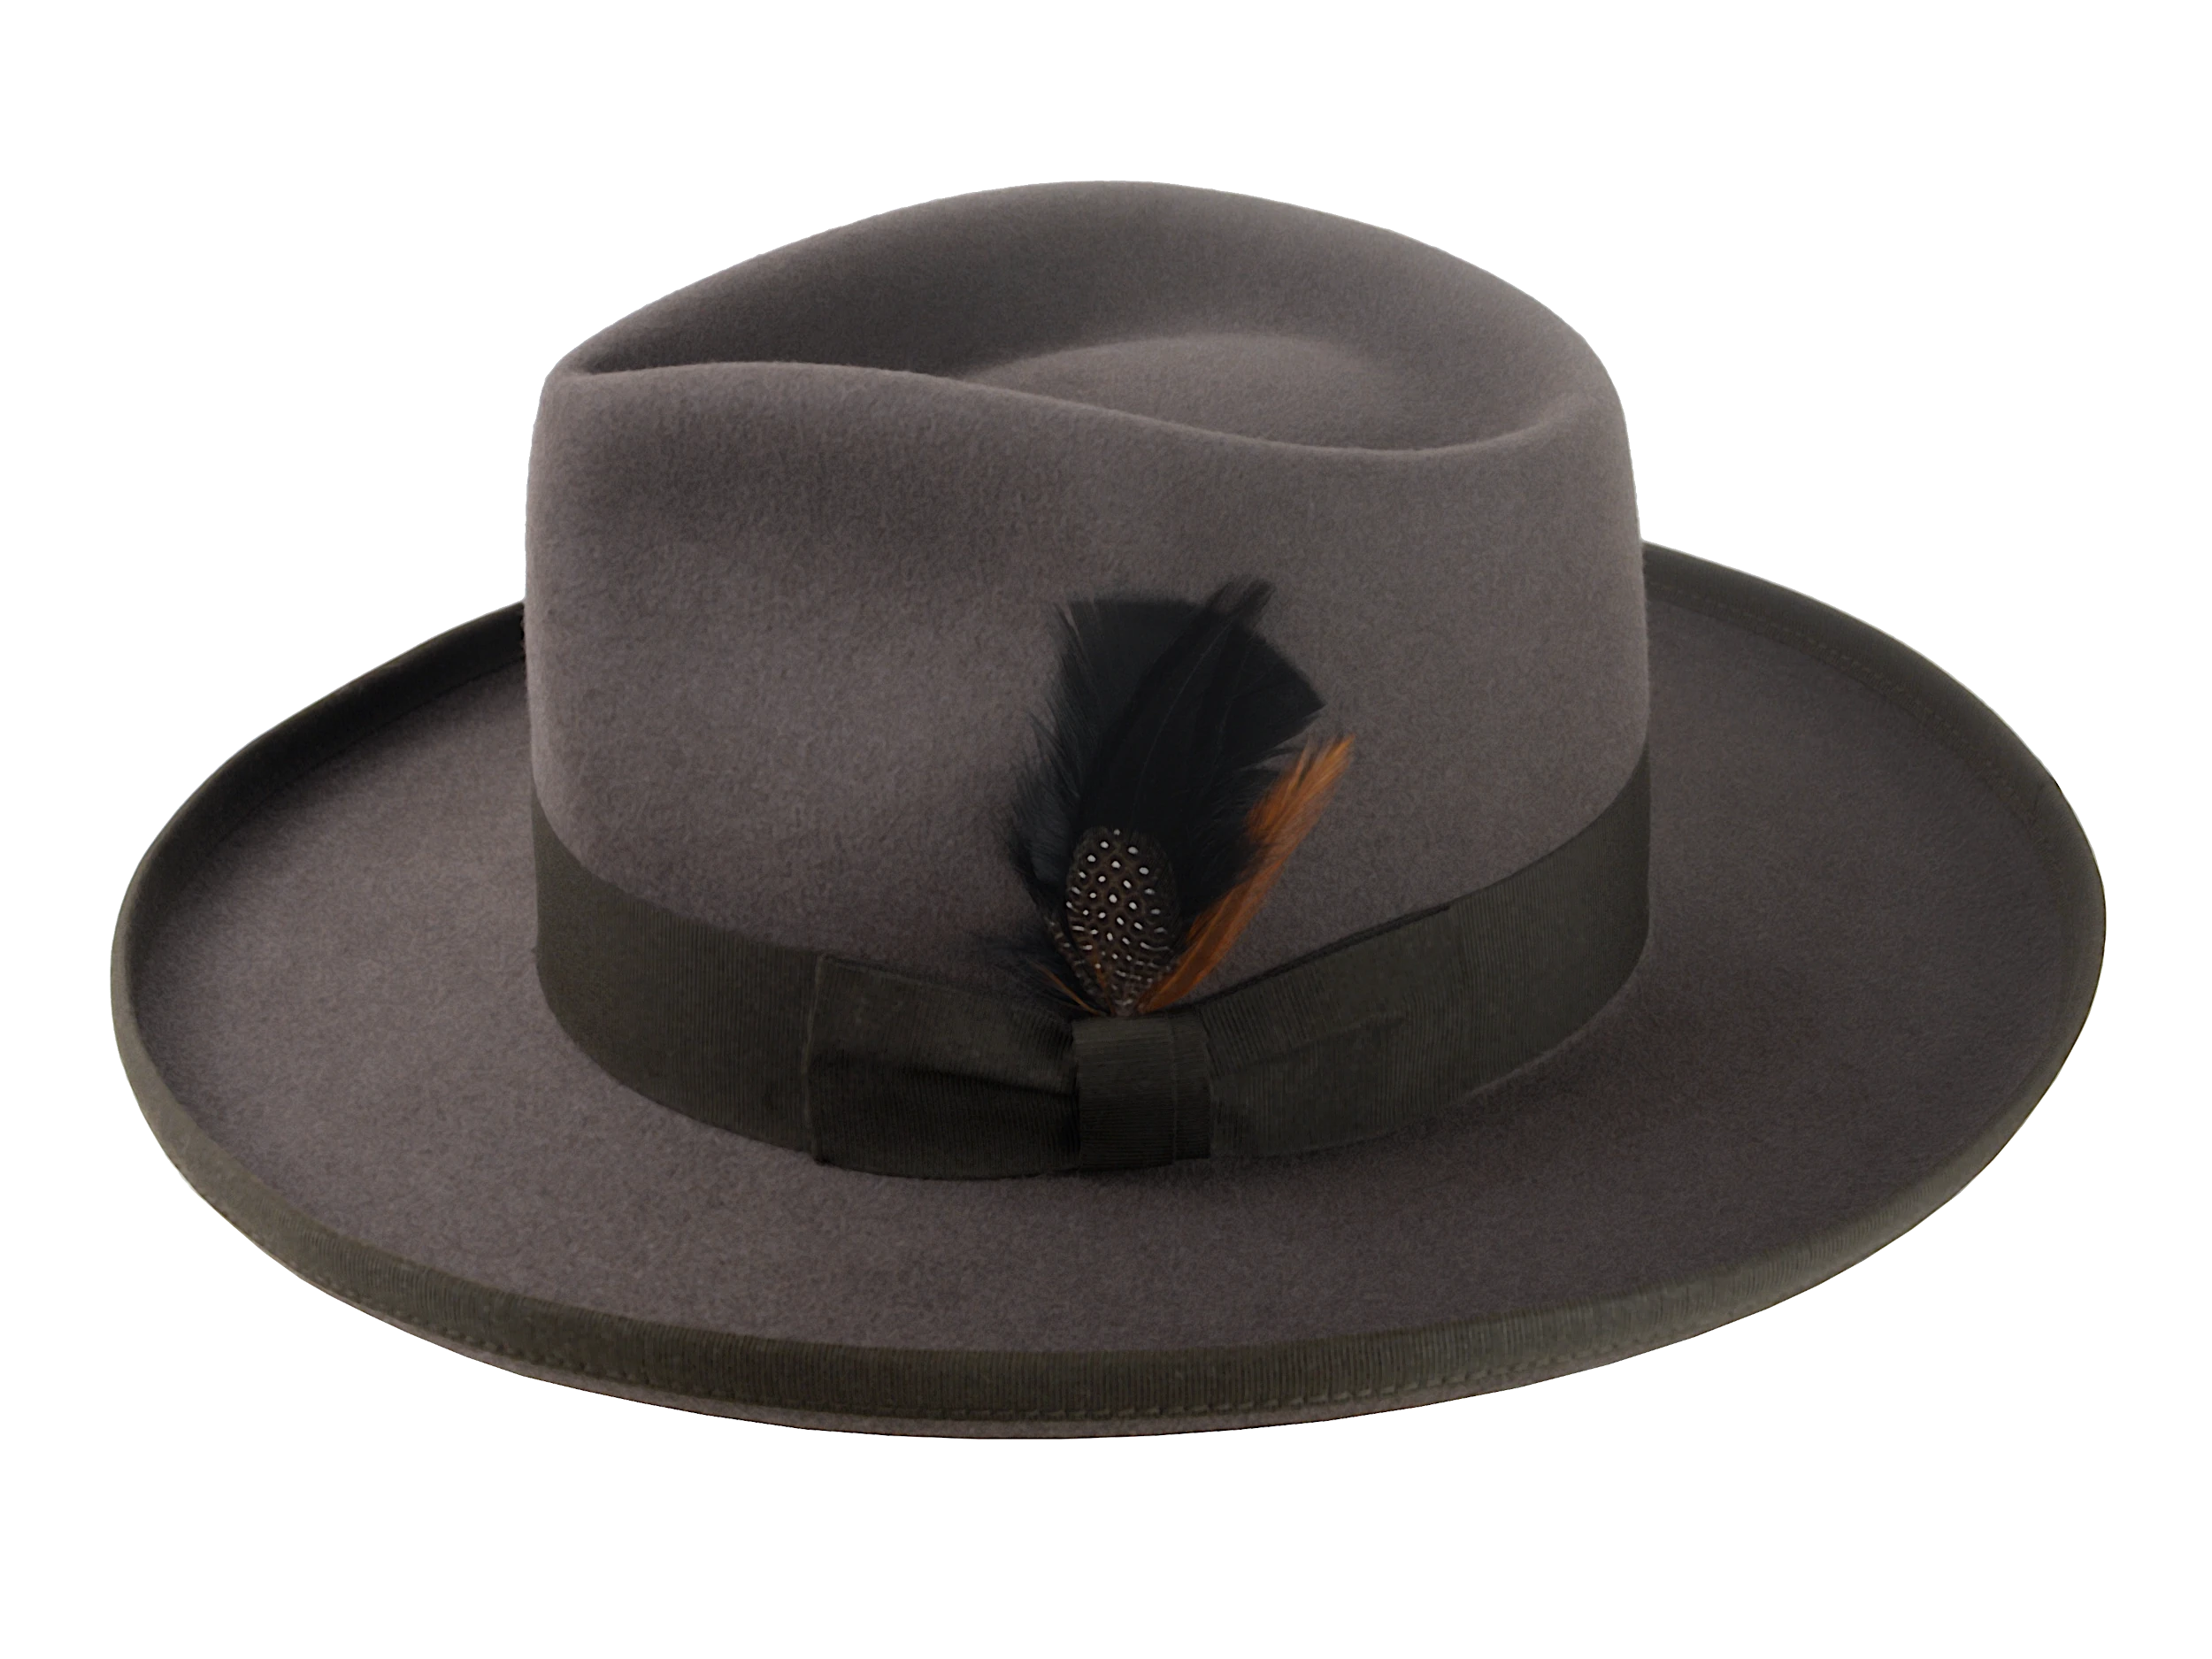 The Rooster: Focus on the 1 1/2" grosgrain ribbon hatband detail | Agnoulita Hats